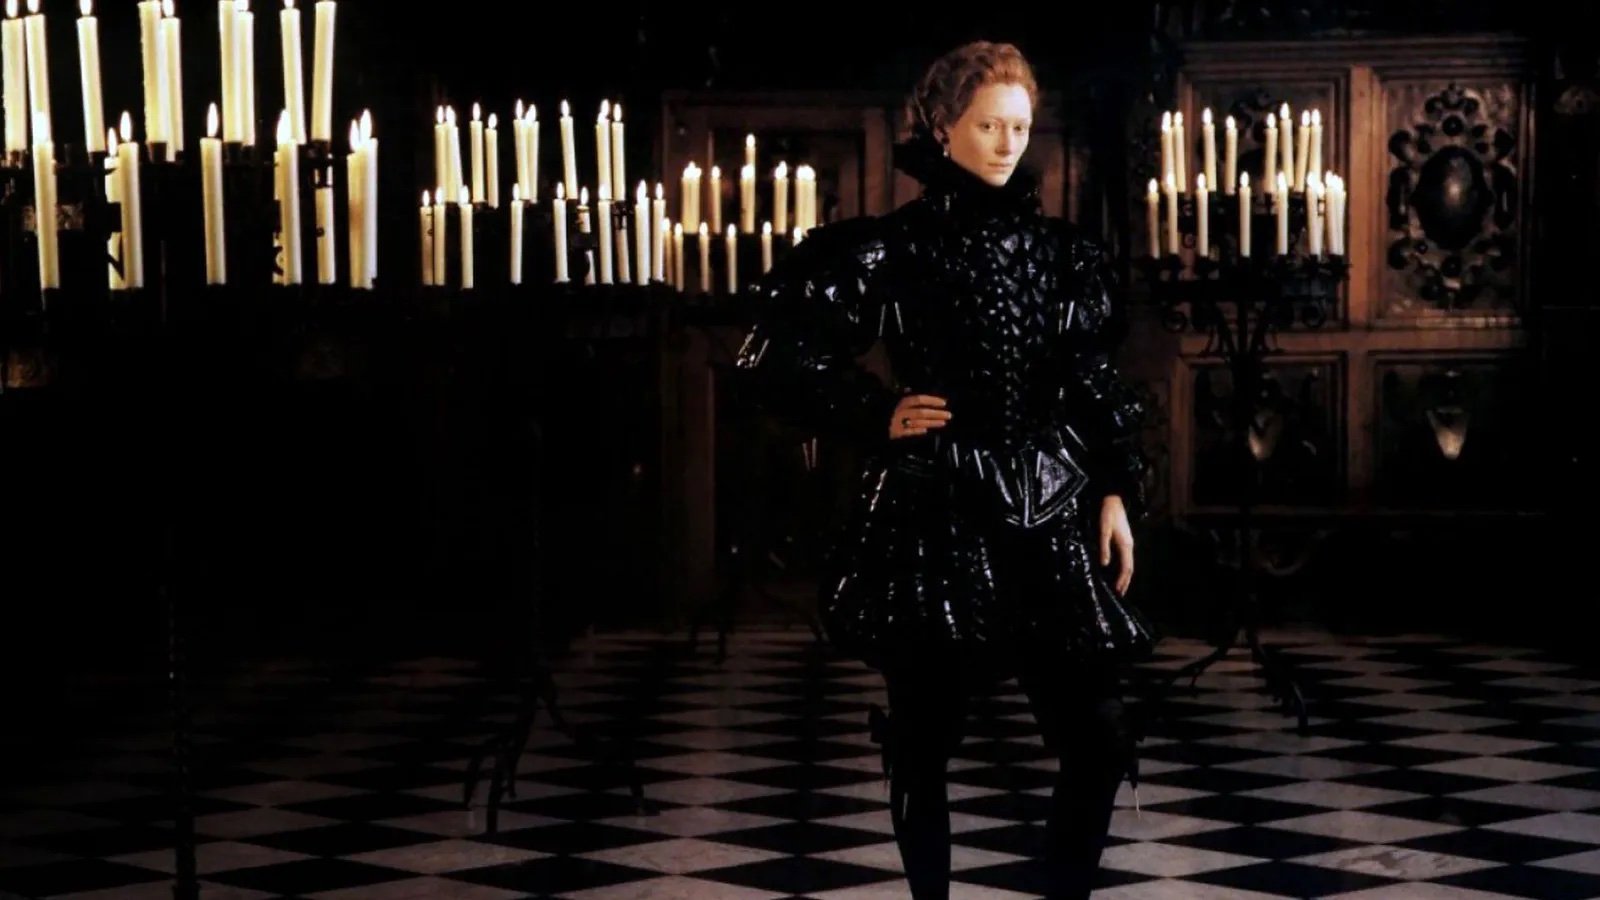 Still from the film Orlando, starring Tilda Swinton, with the title character in lovely gothic surroundings